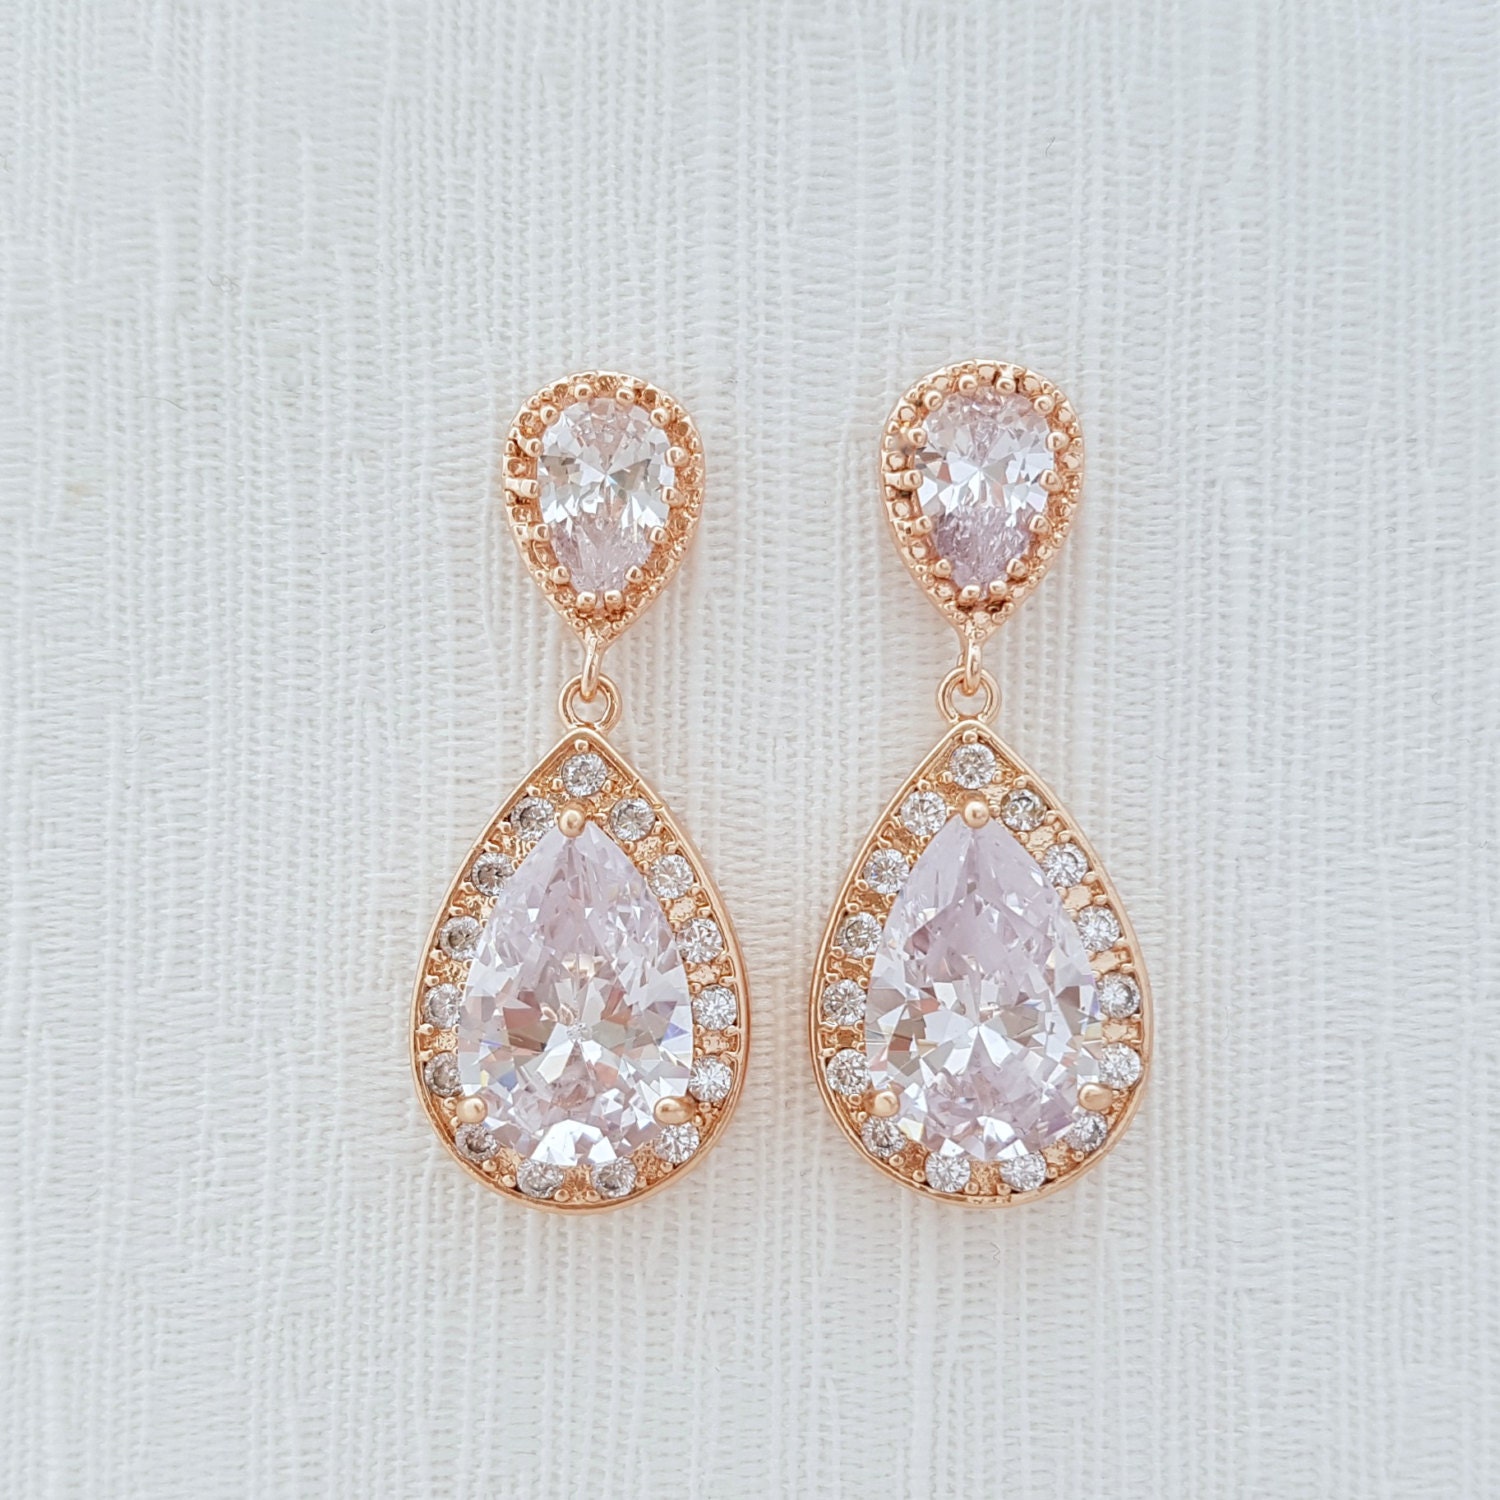 Rose Gold Earrings Bridal Jewelry Rose Gold By Poetryjewelry